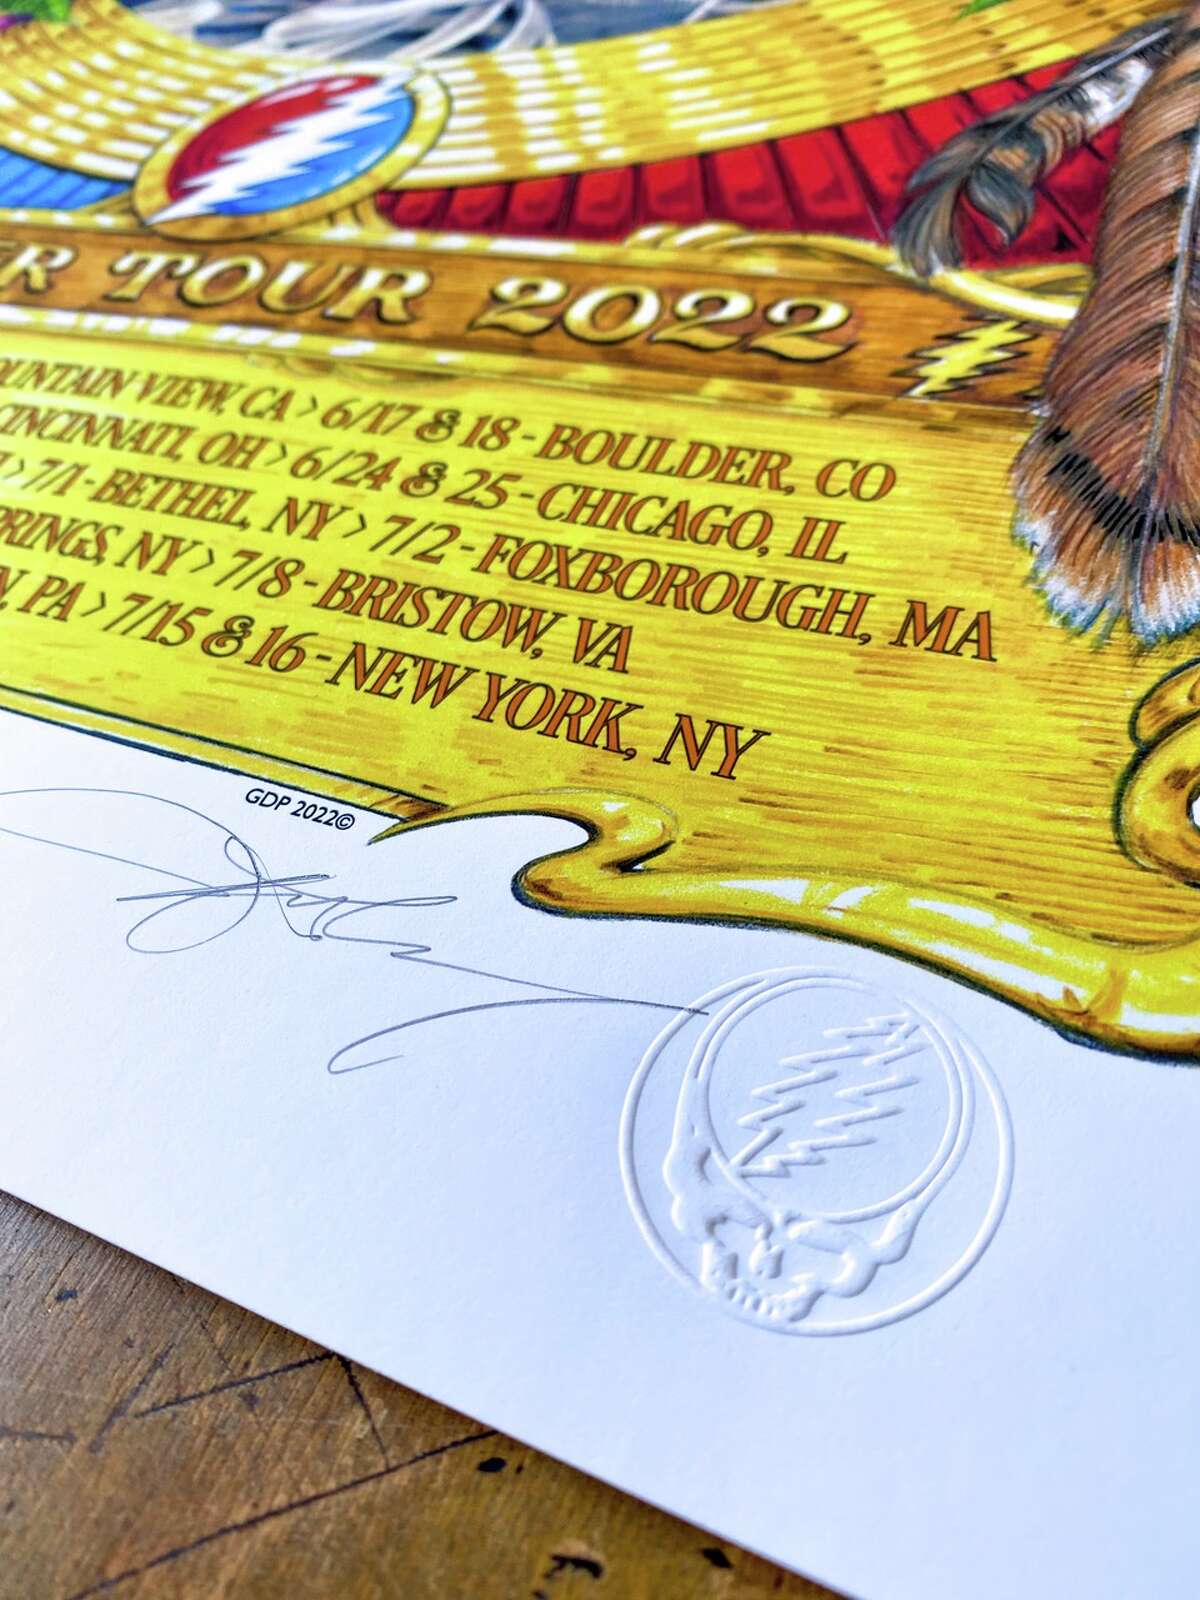 A "Steal Your Face" embellished on AJ Masthay's 2022 summer tour poster for Dead & Company